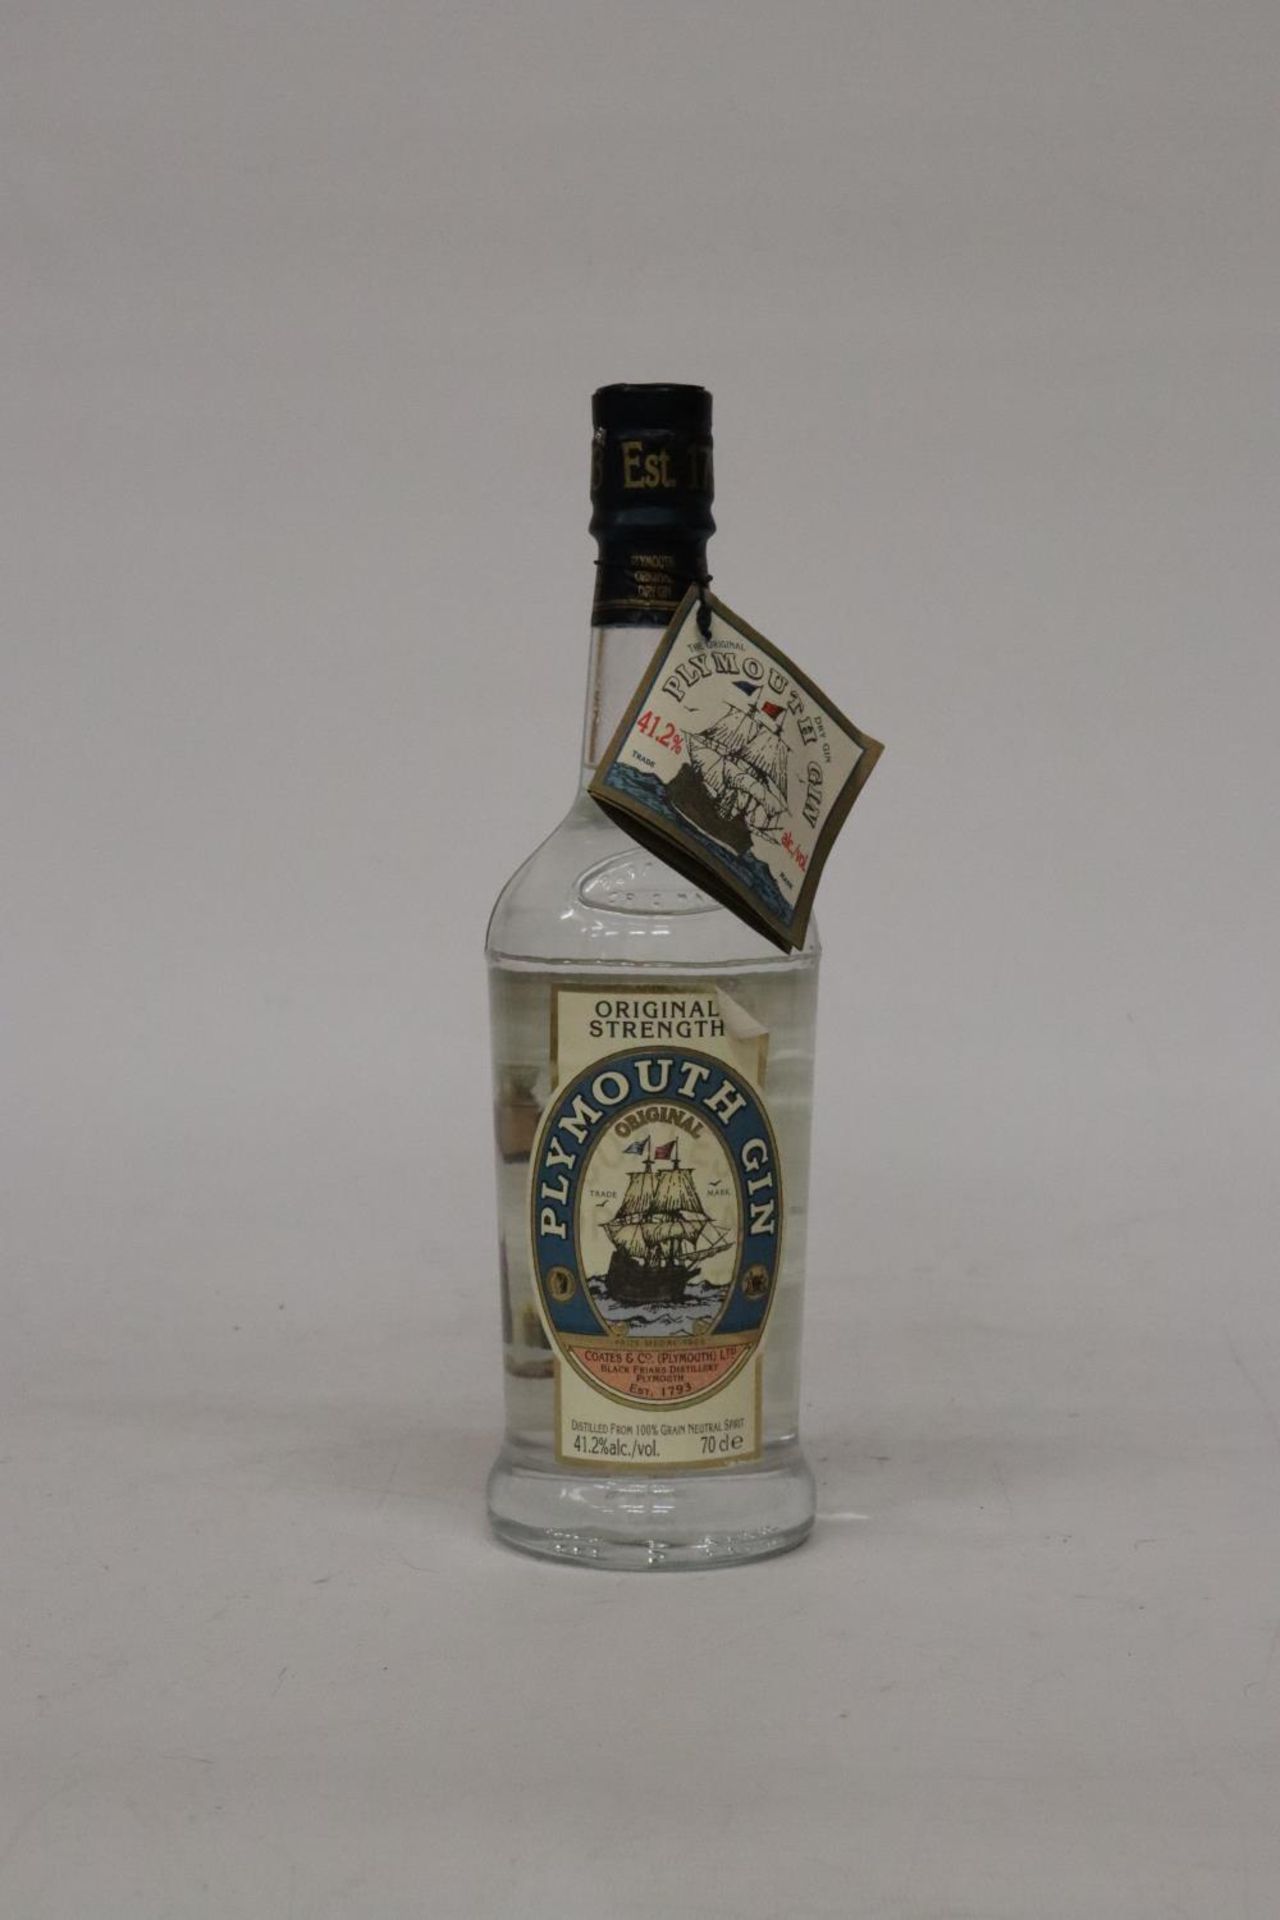 A 70CL BOTTLE OF ORIGINAL STRENGTH PLYMOUTH GIN